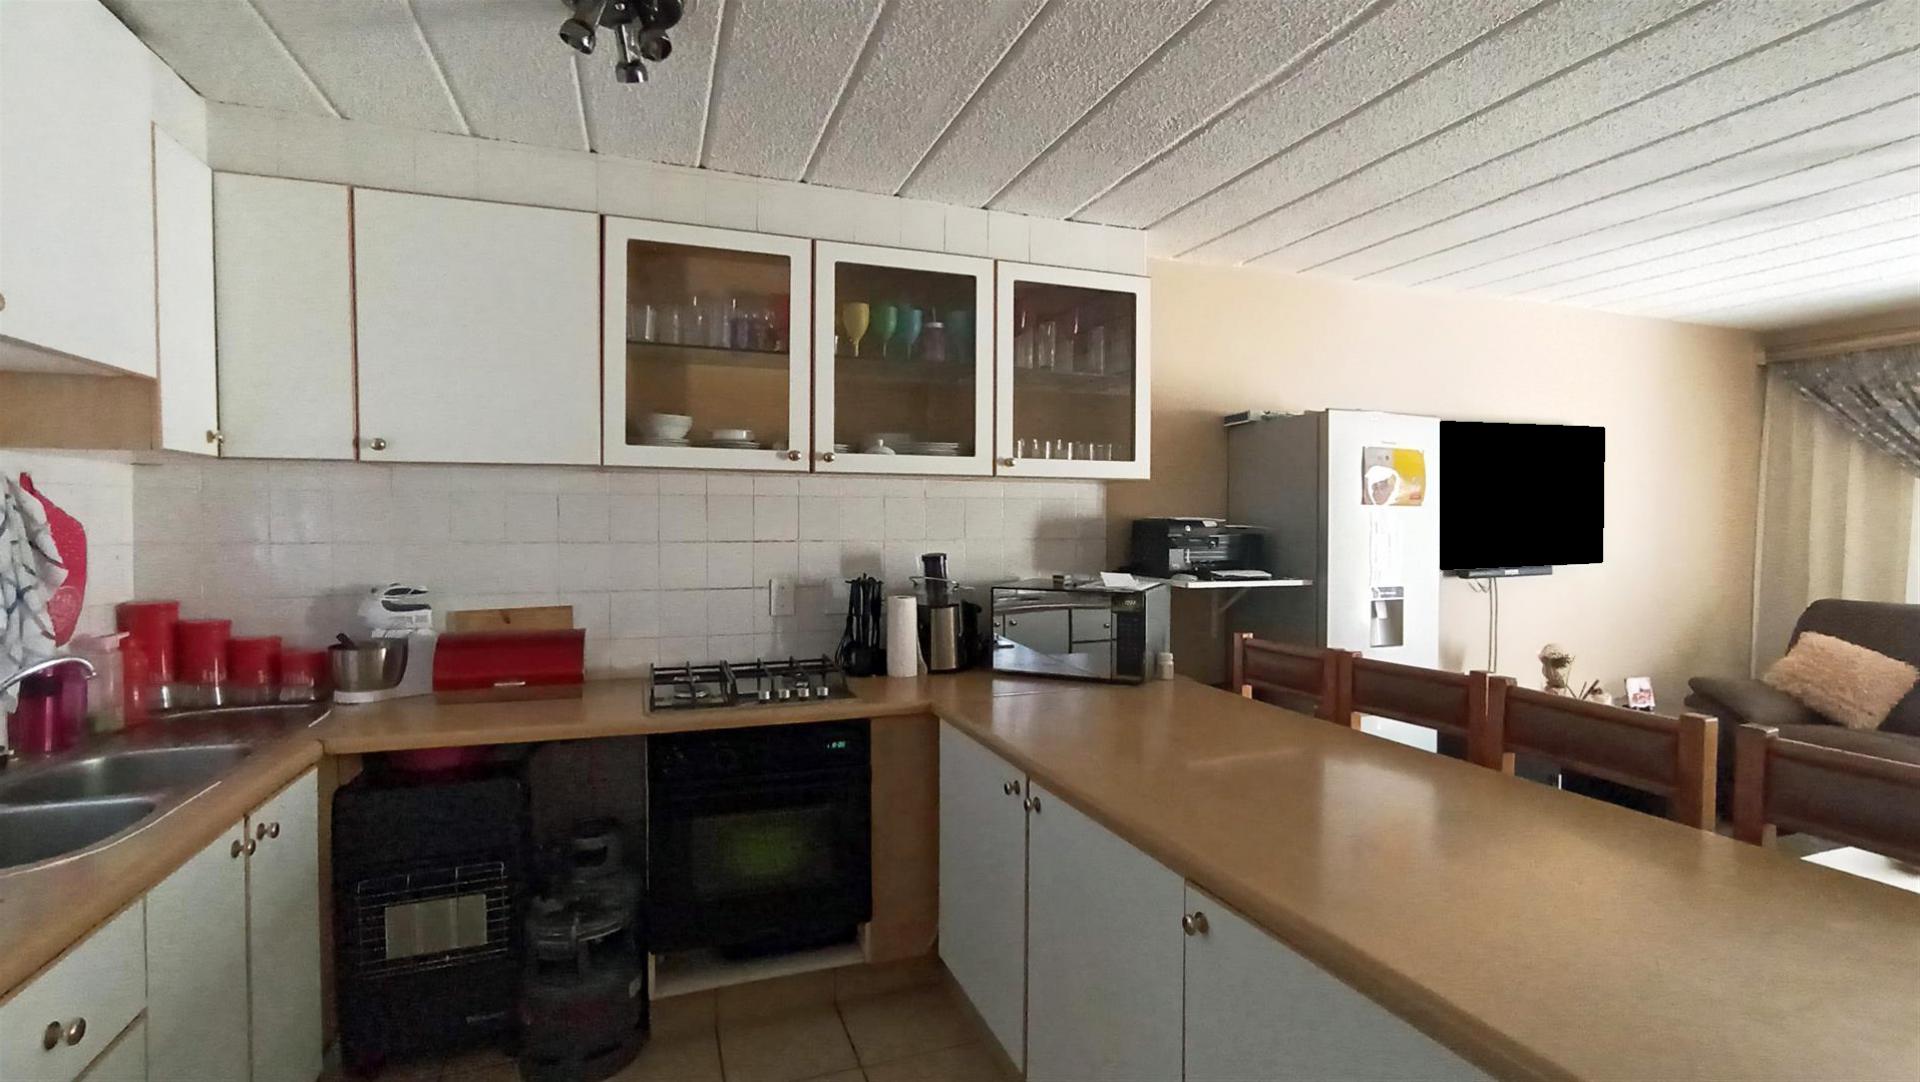 Kitchen - 7 square meters of property in Ravenswood